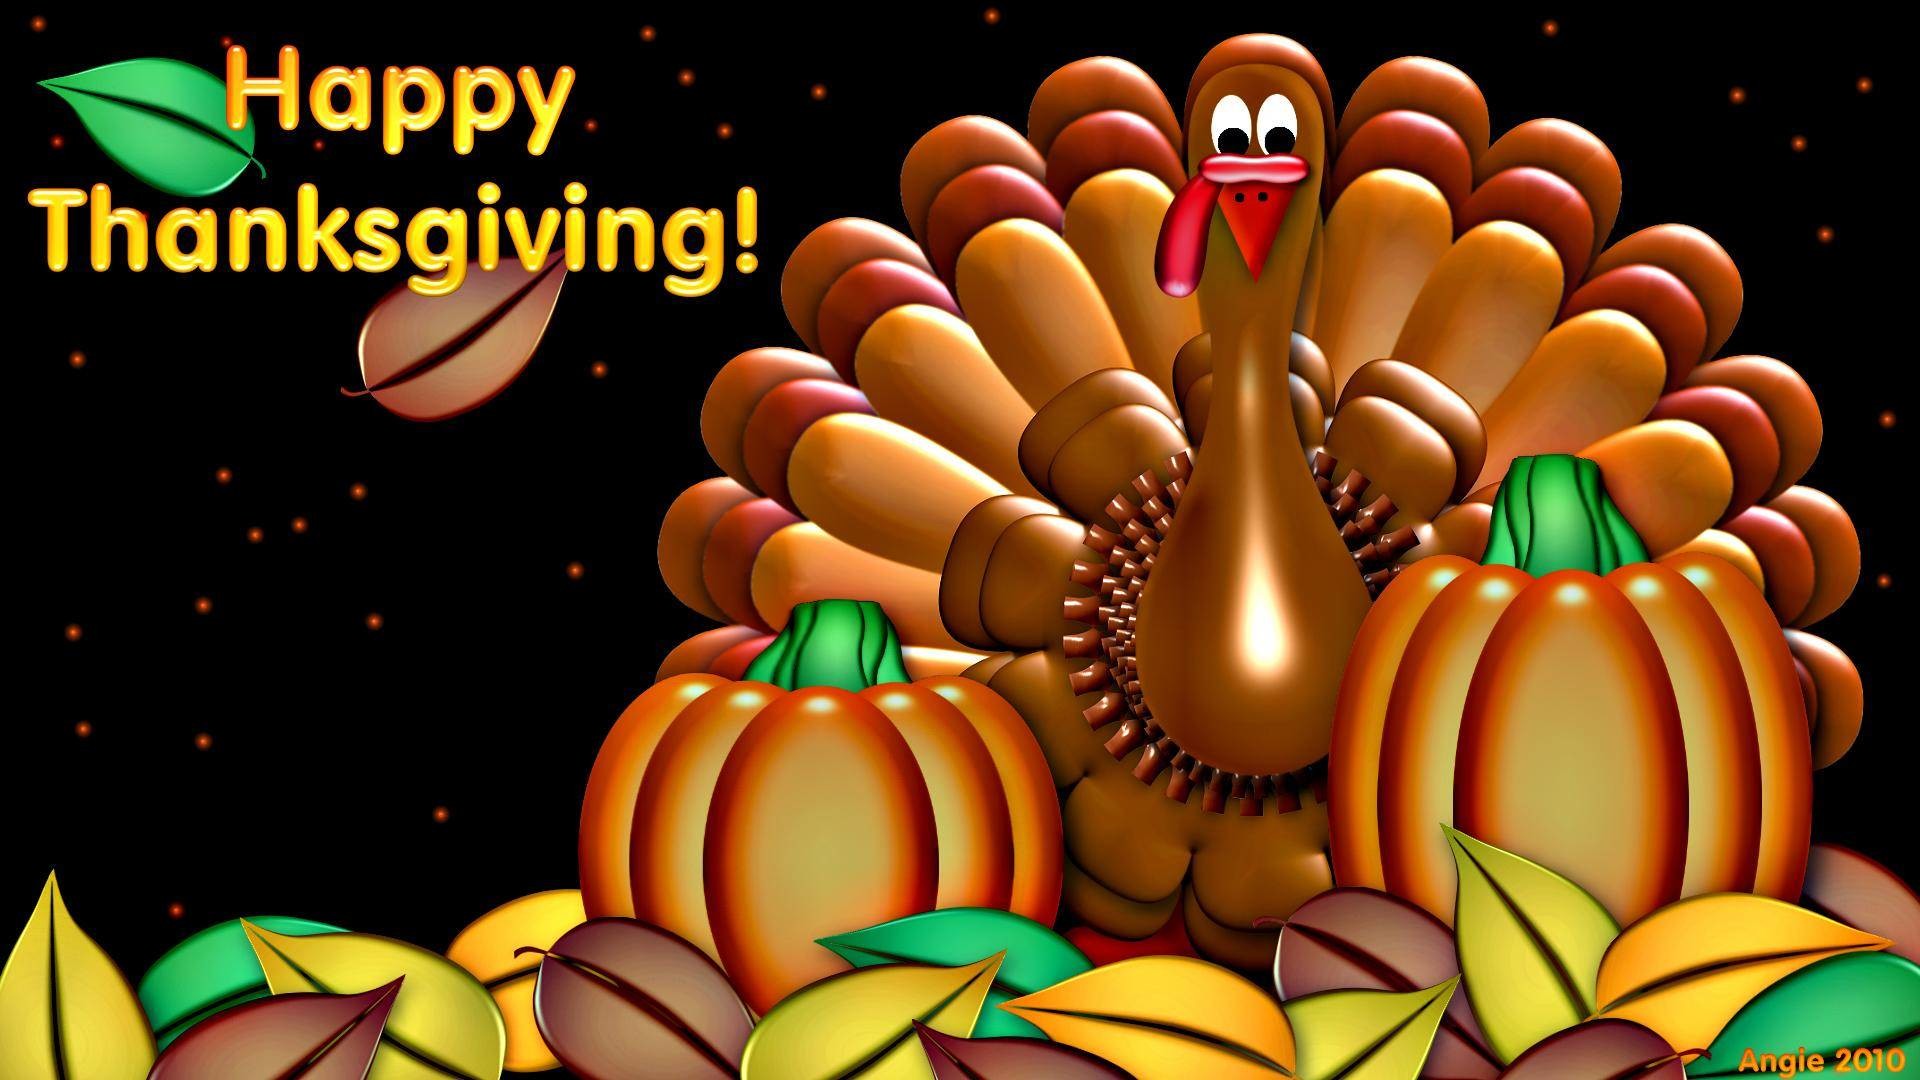 Funny Thanksgiving Wallpaper The Best Image In